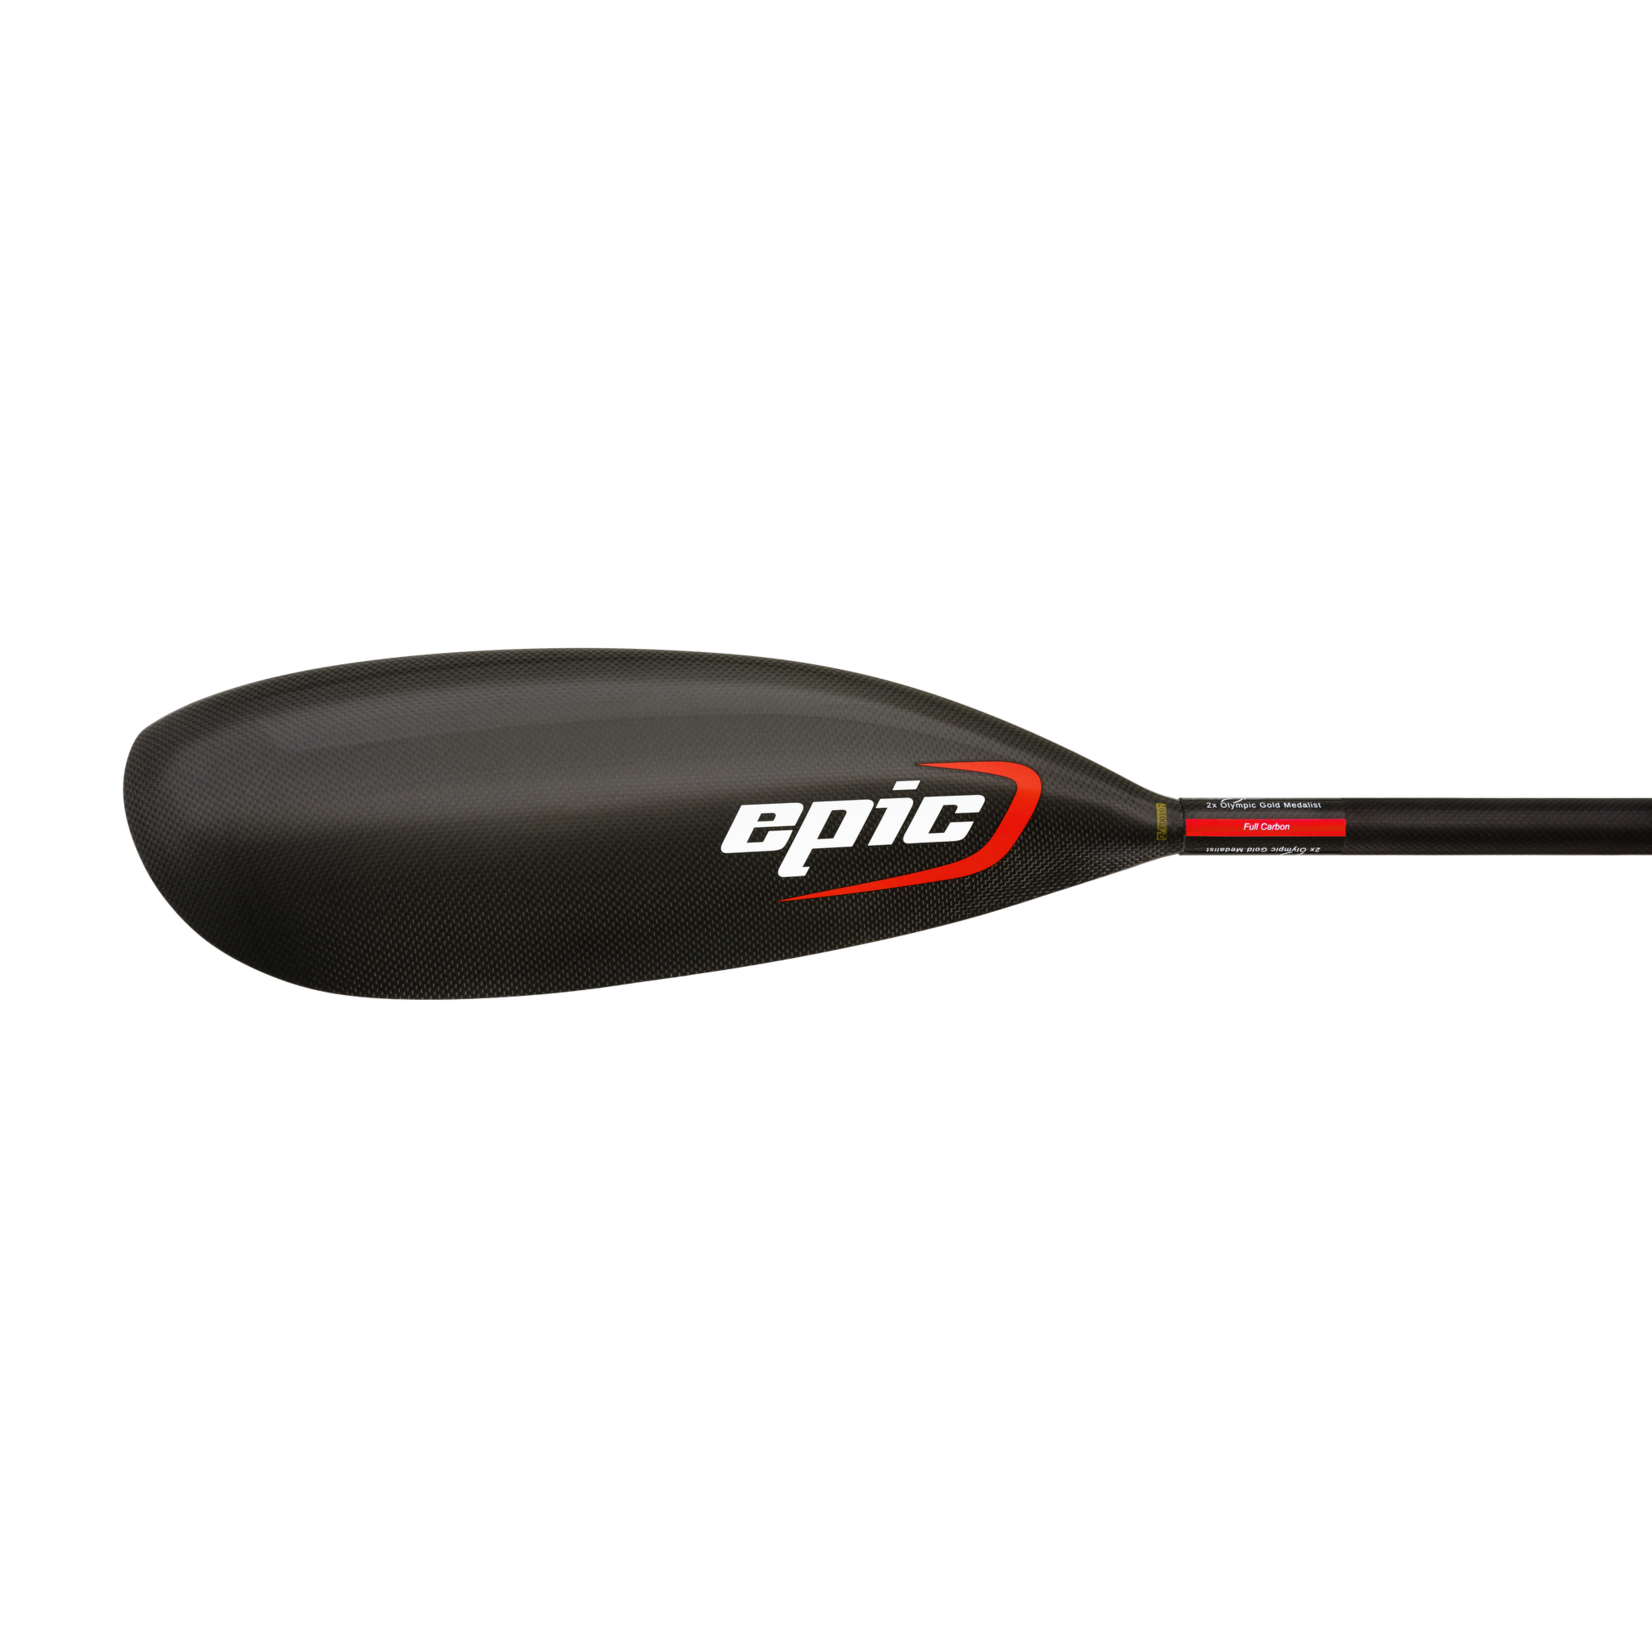 Epic Kayaks Mid Wing Paddle Full Carbon 205-215